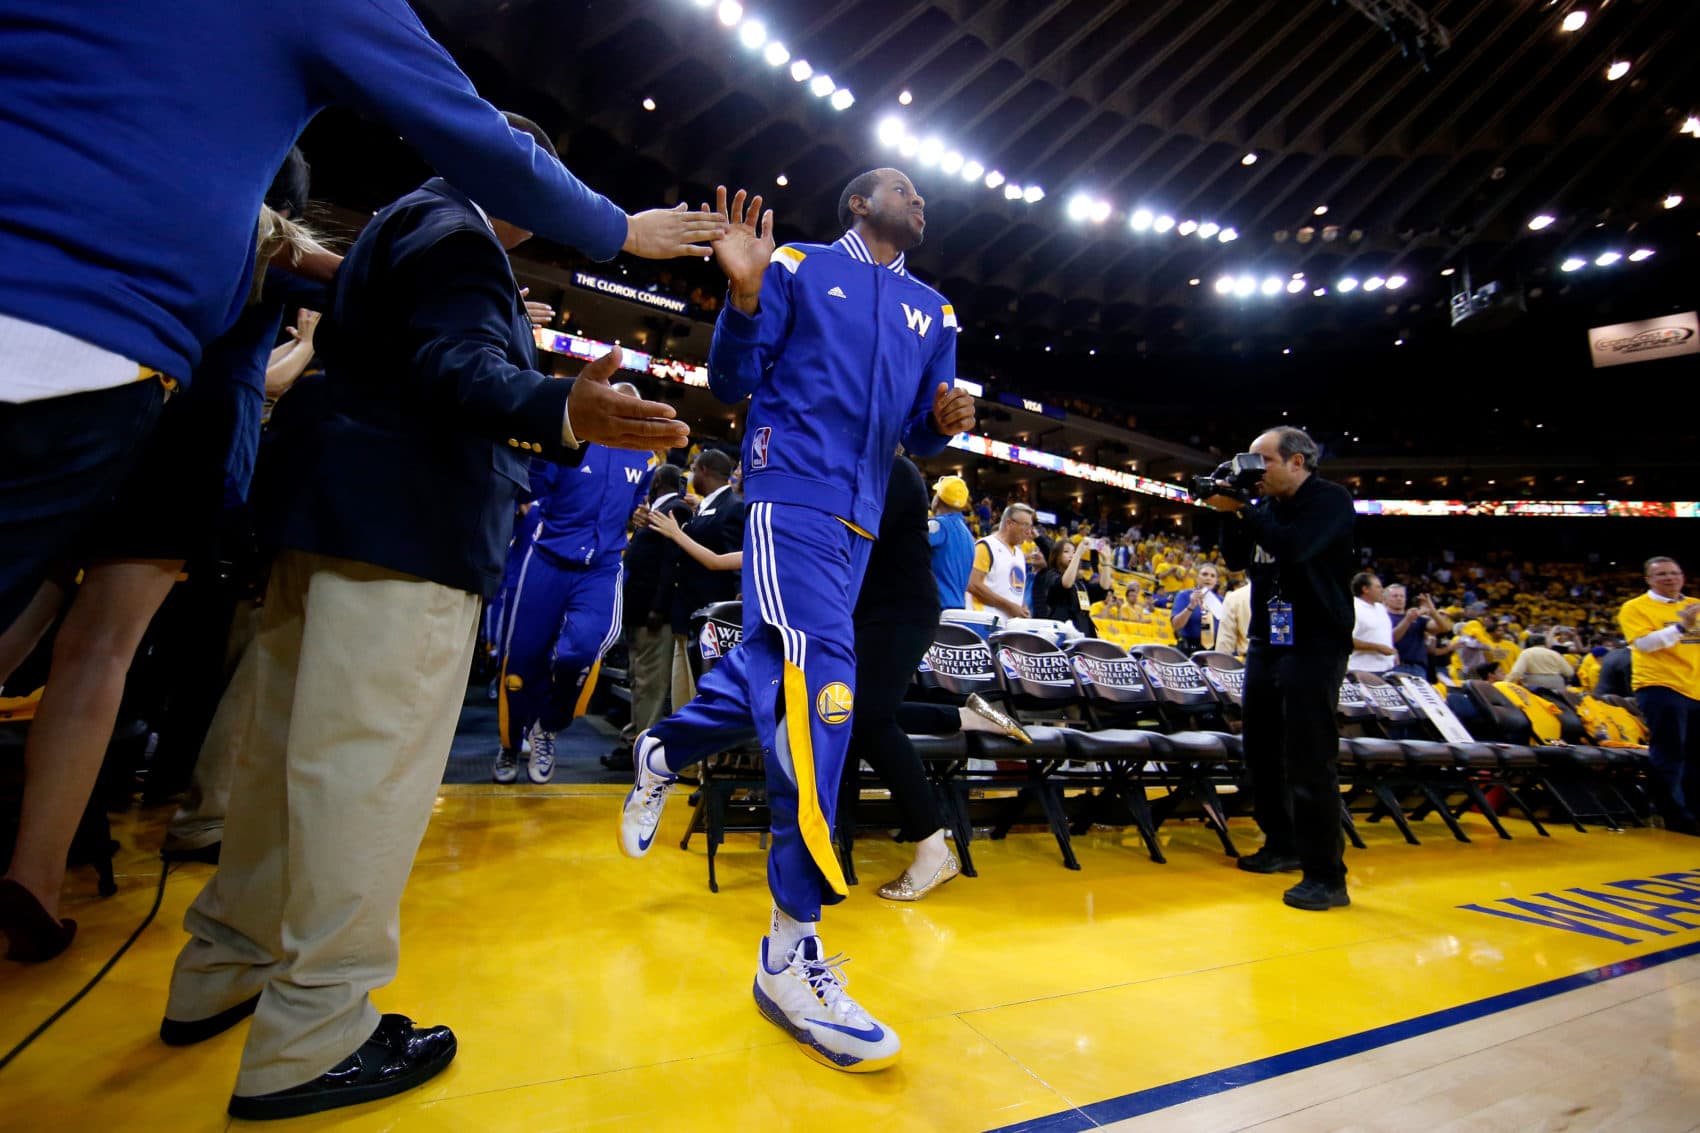 Andre Iguodala named Finals MVP after coming off bench to begin